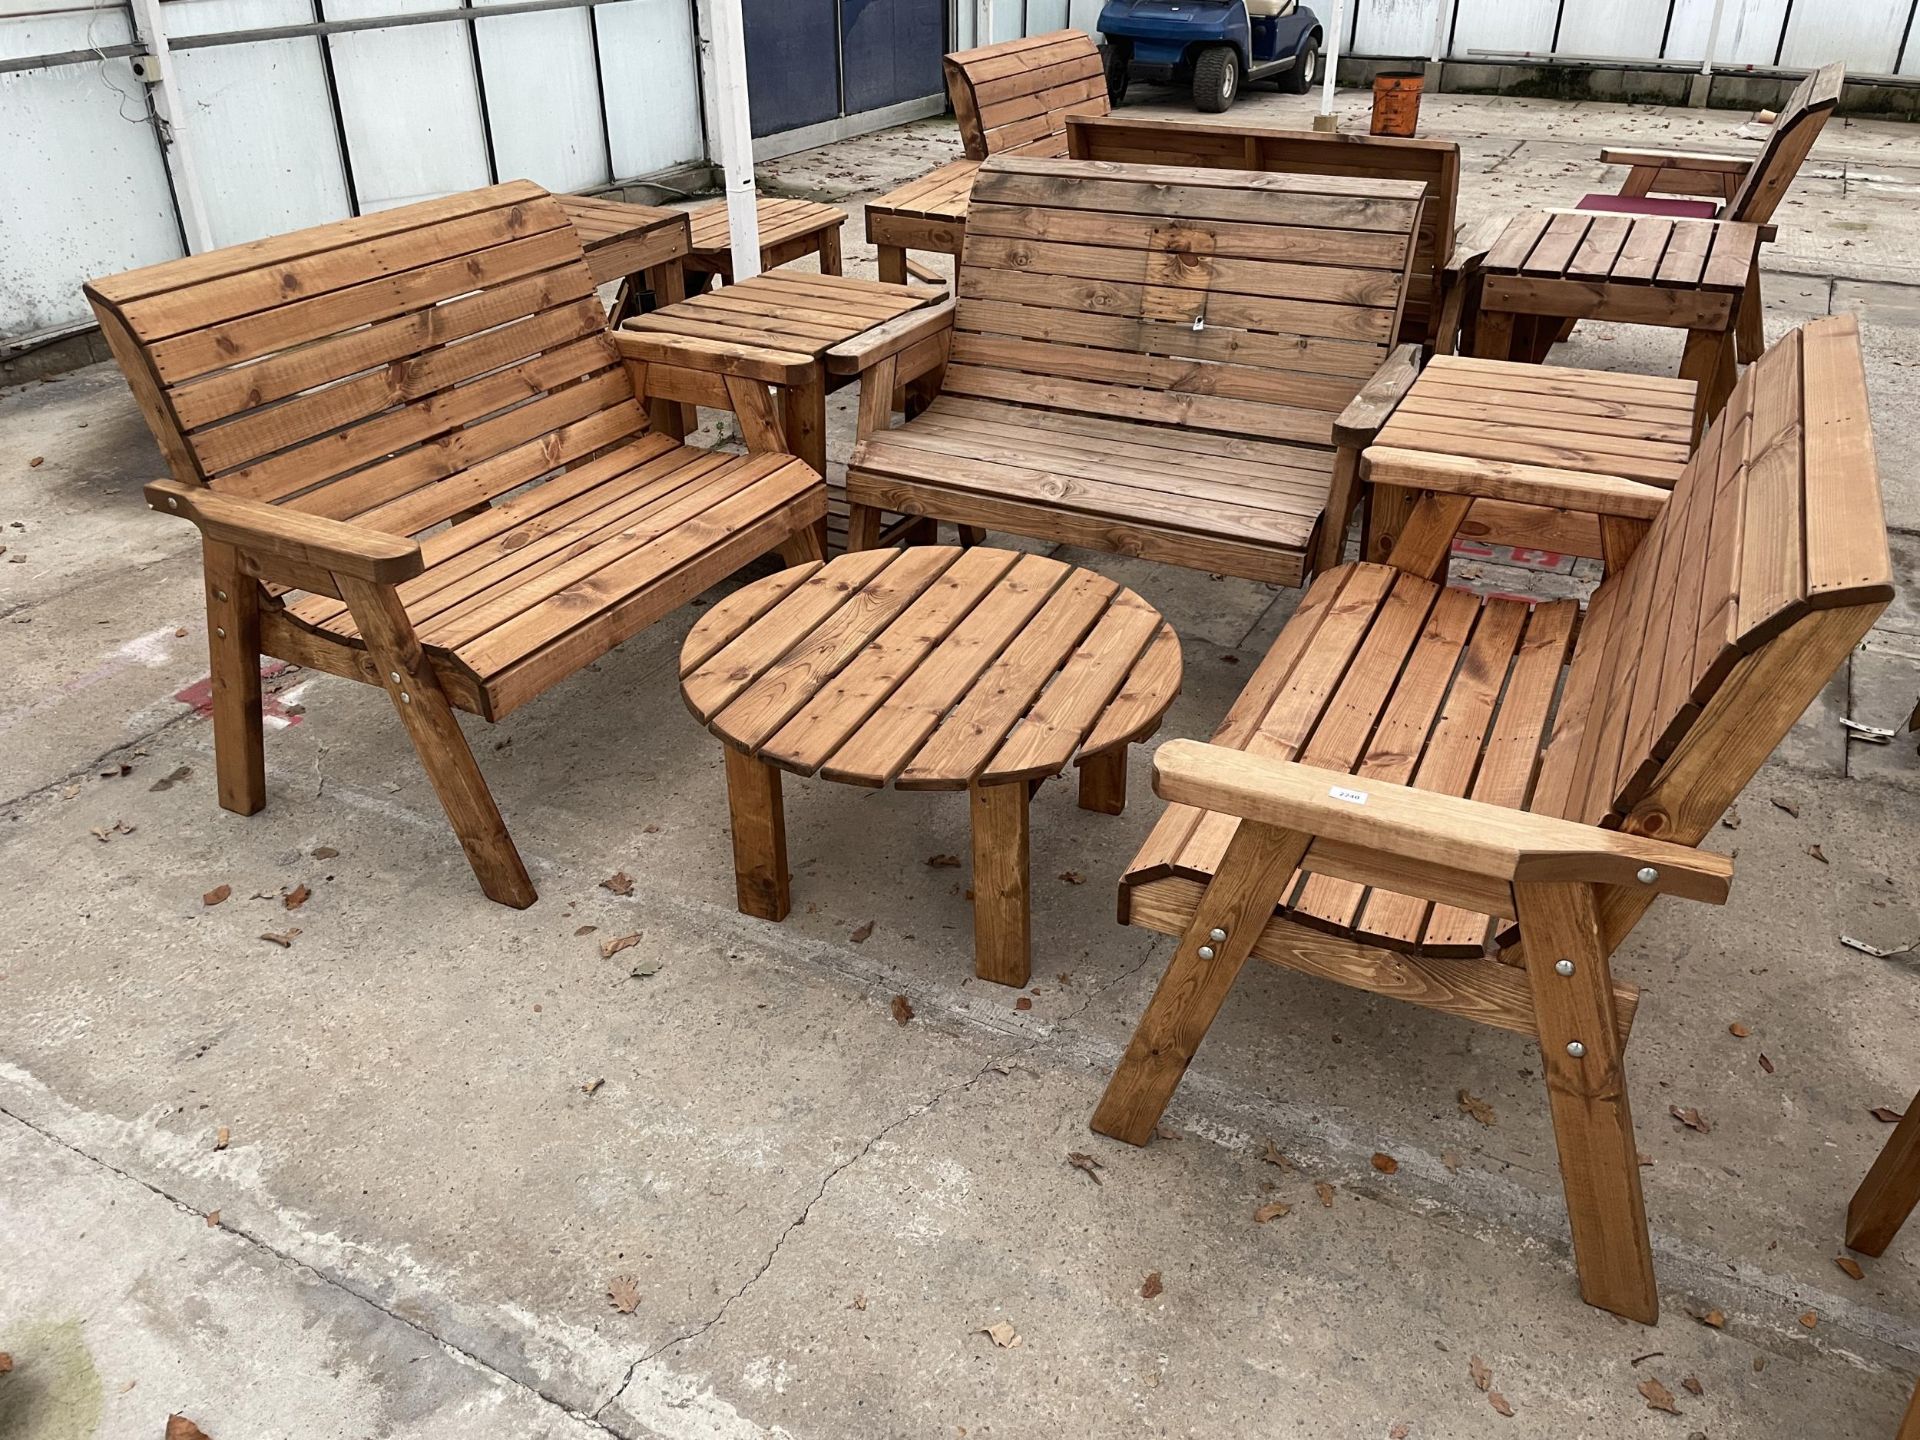 AN AS NEW EX DISPLAY CHARLES TAYLOR PATIO SET COMPRISING OF THREE TWO SEATER BENCHES, TWO SIDE